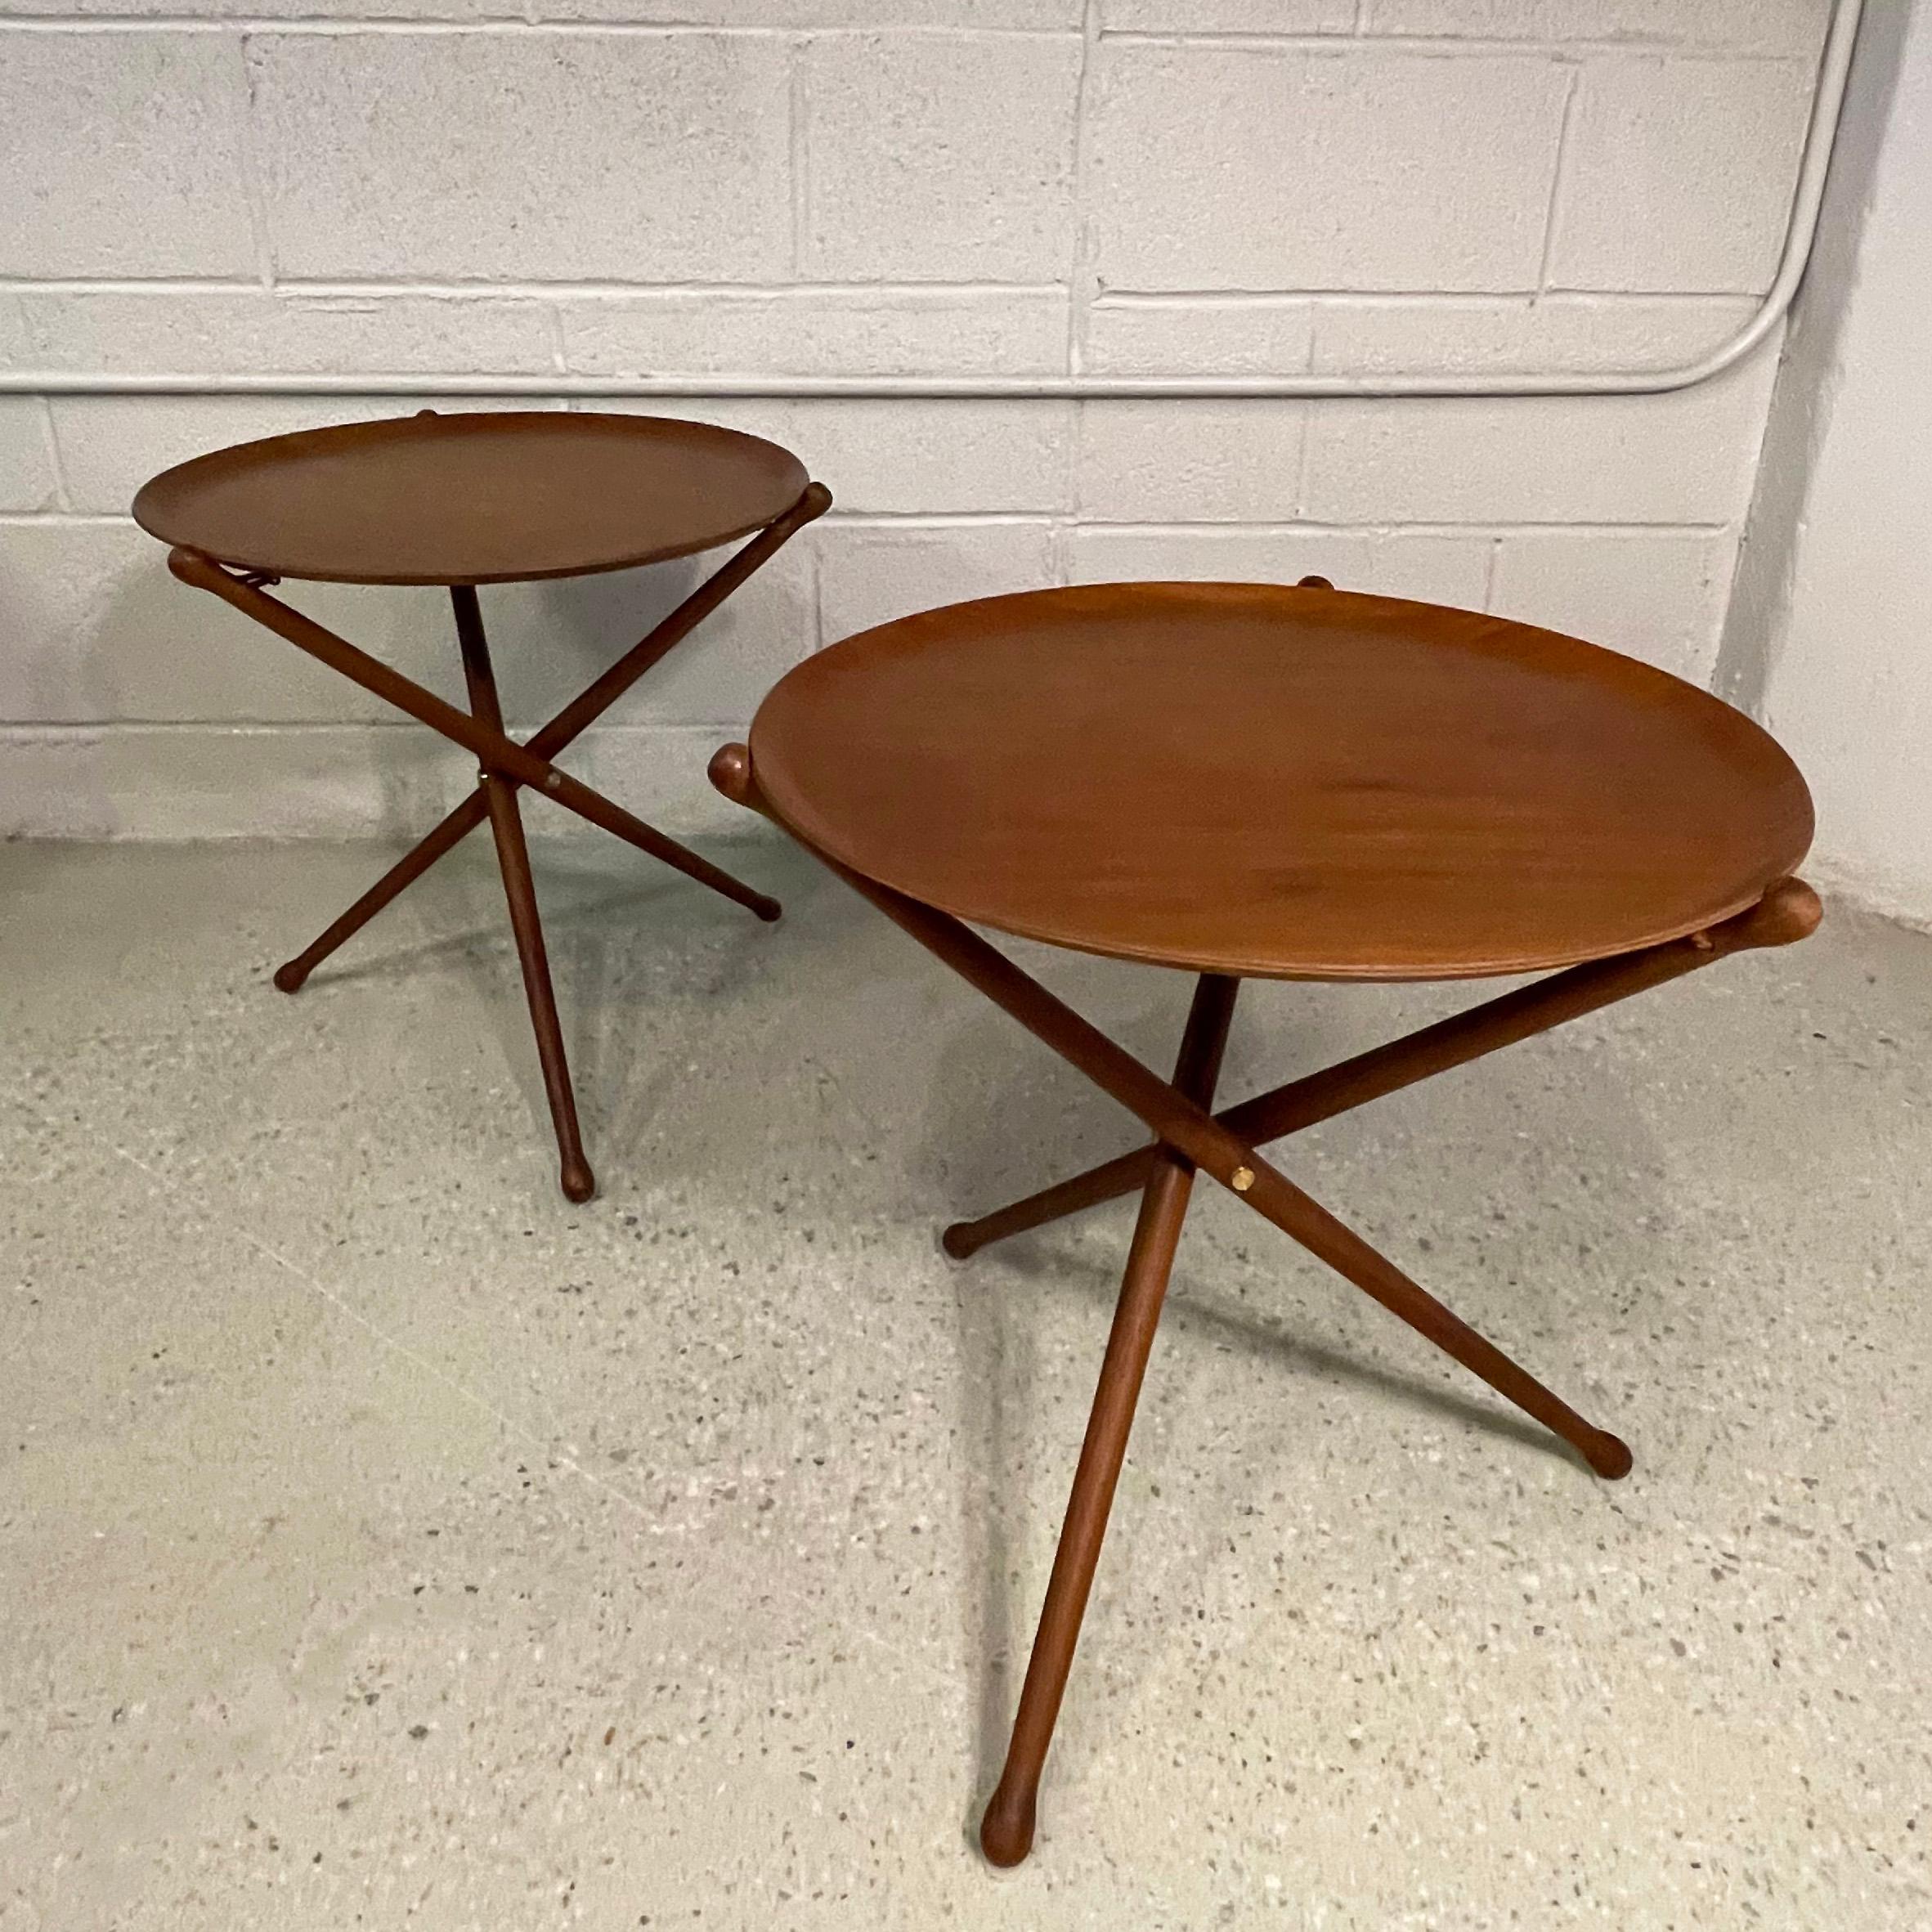 Pair of Scandinavian modern, teak, folding, tray tables by Nils Trautner for Ary Nybro, Sweden feature collapsible, leather strung, tripod bases that accept 17.5 inch round tray surfaces. The tables fold completely to store away and are very sturdy